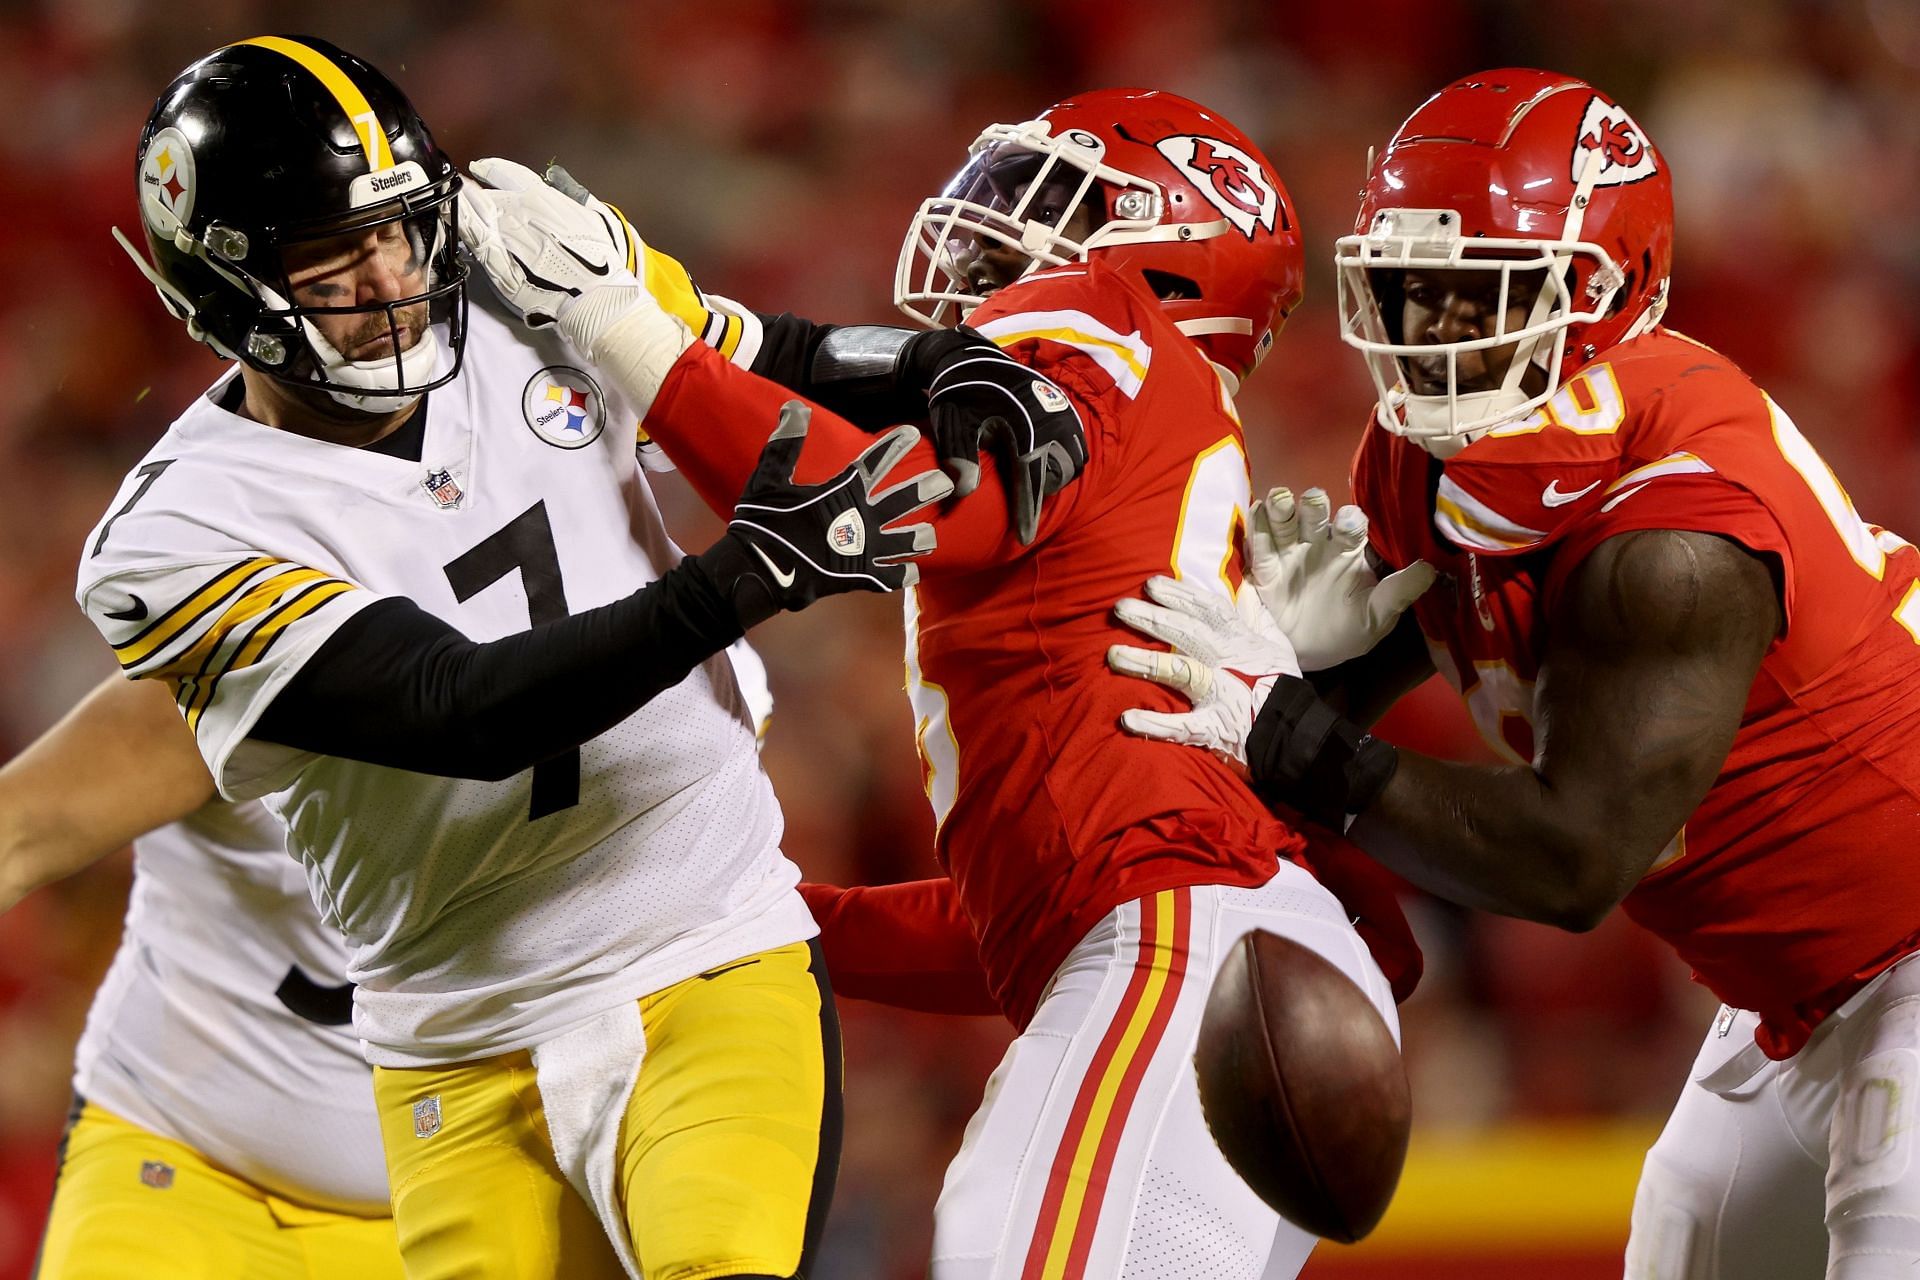 Ben Roethlisberger (left) and the Steelers were crushed by the Chiefs, dooming their NFL playoff chances (Photo: Getty)